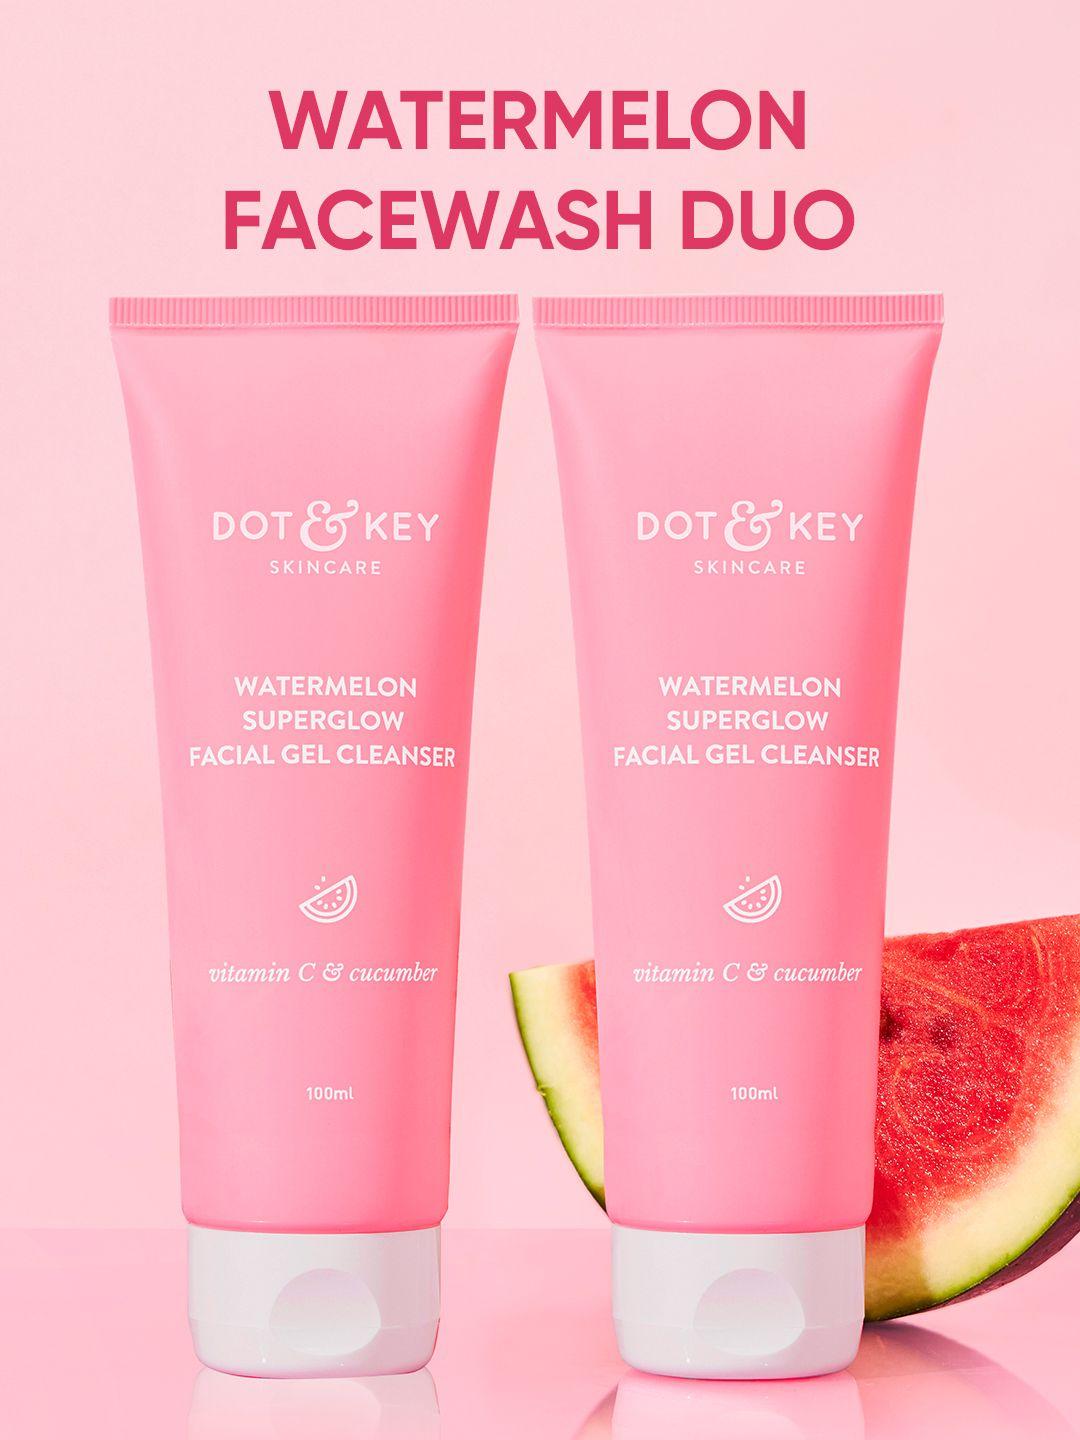 dot & key set of 2 watermelon superglow facial gel cleanser with vitamin c - 100ml each